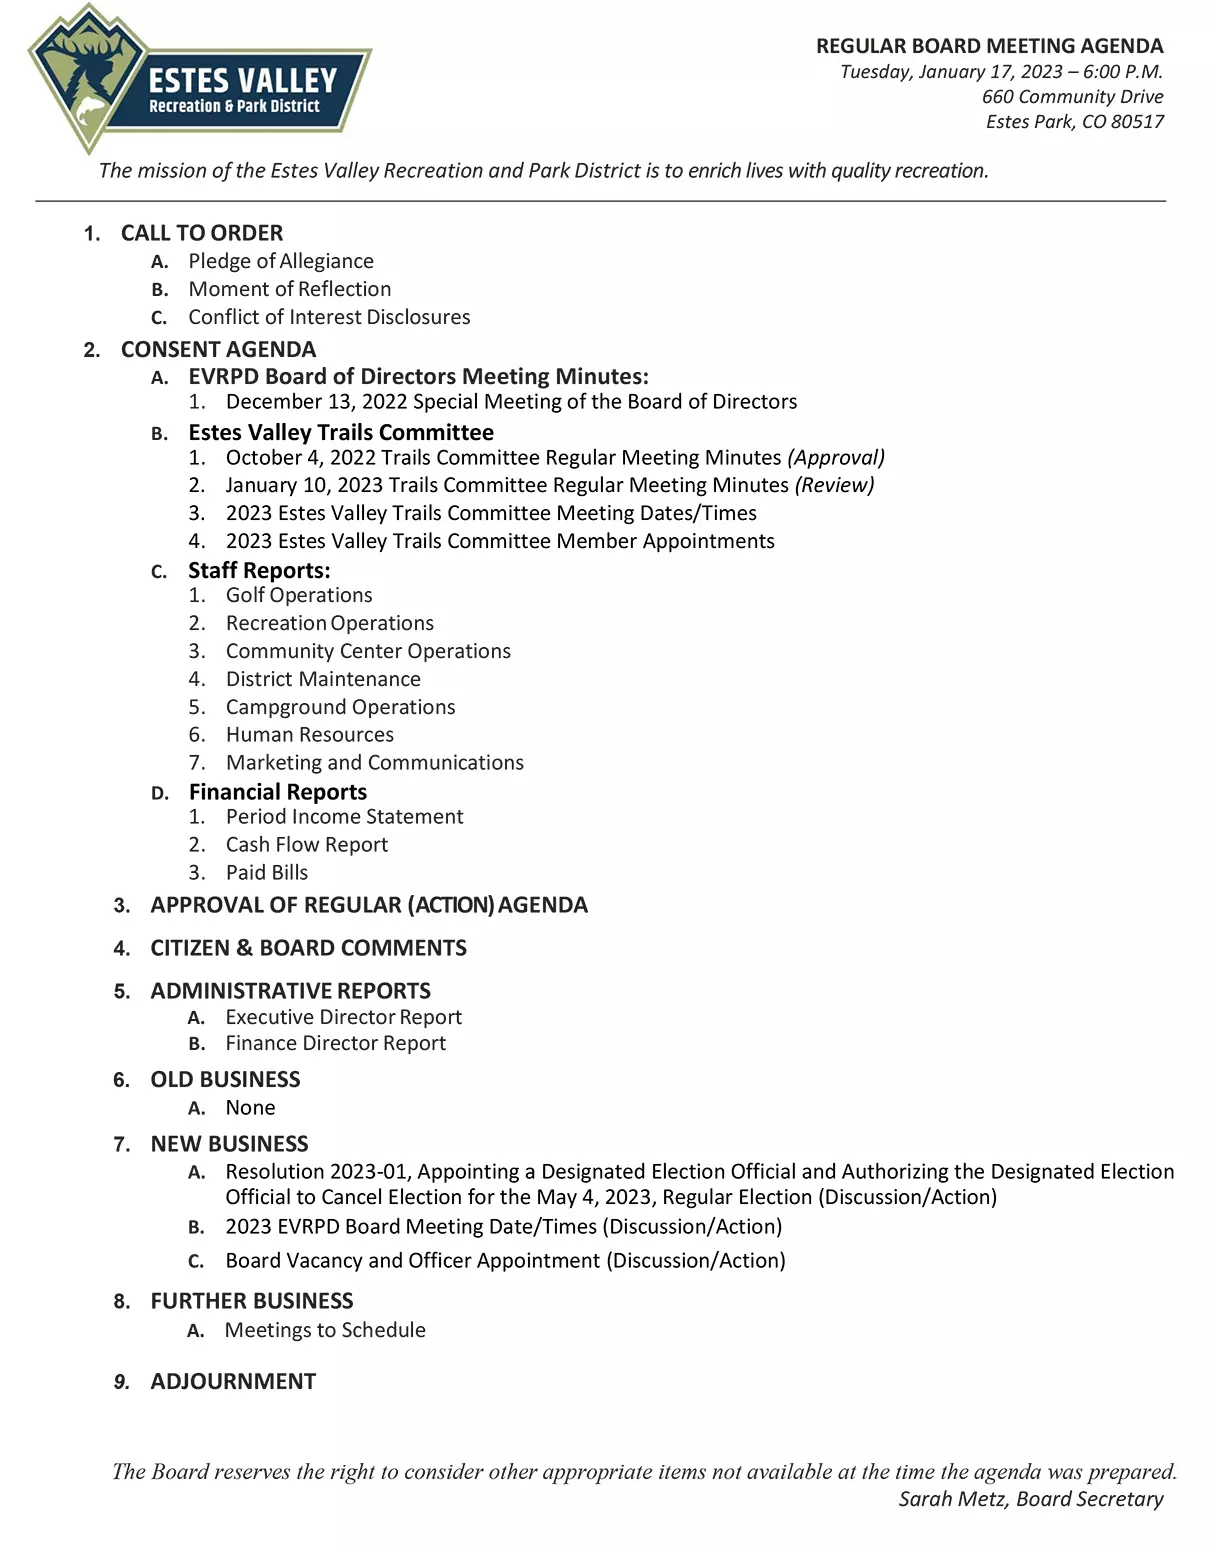 Agenda for January 2023 EVRPD Board of Directors meeting